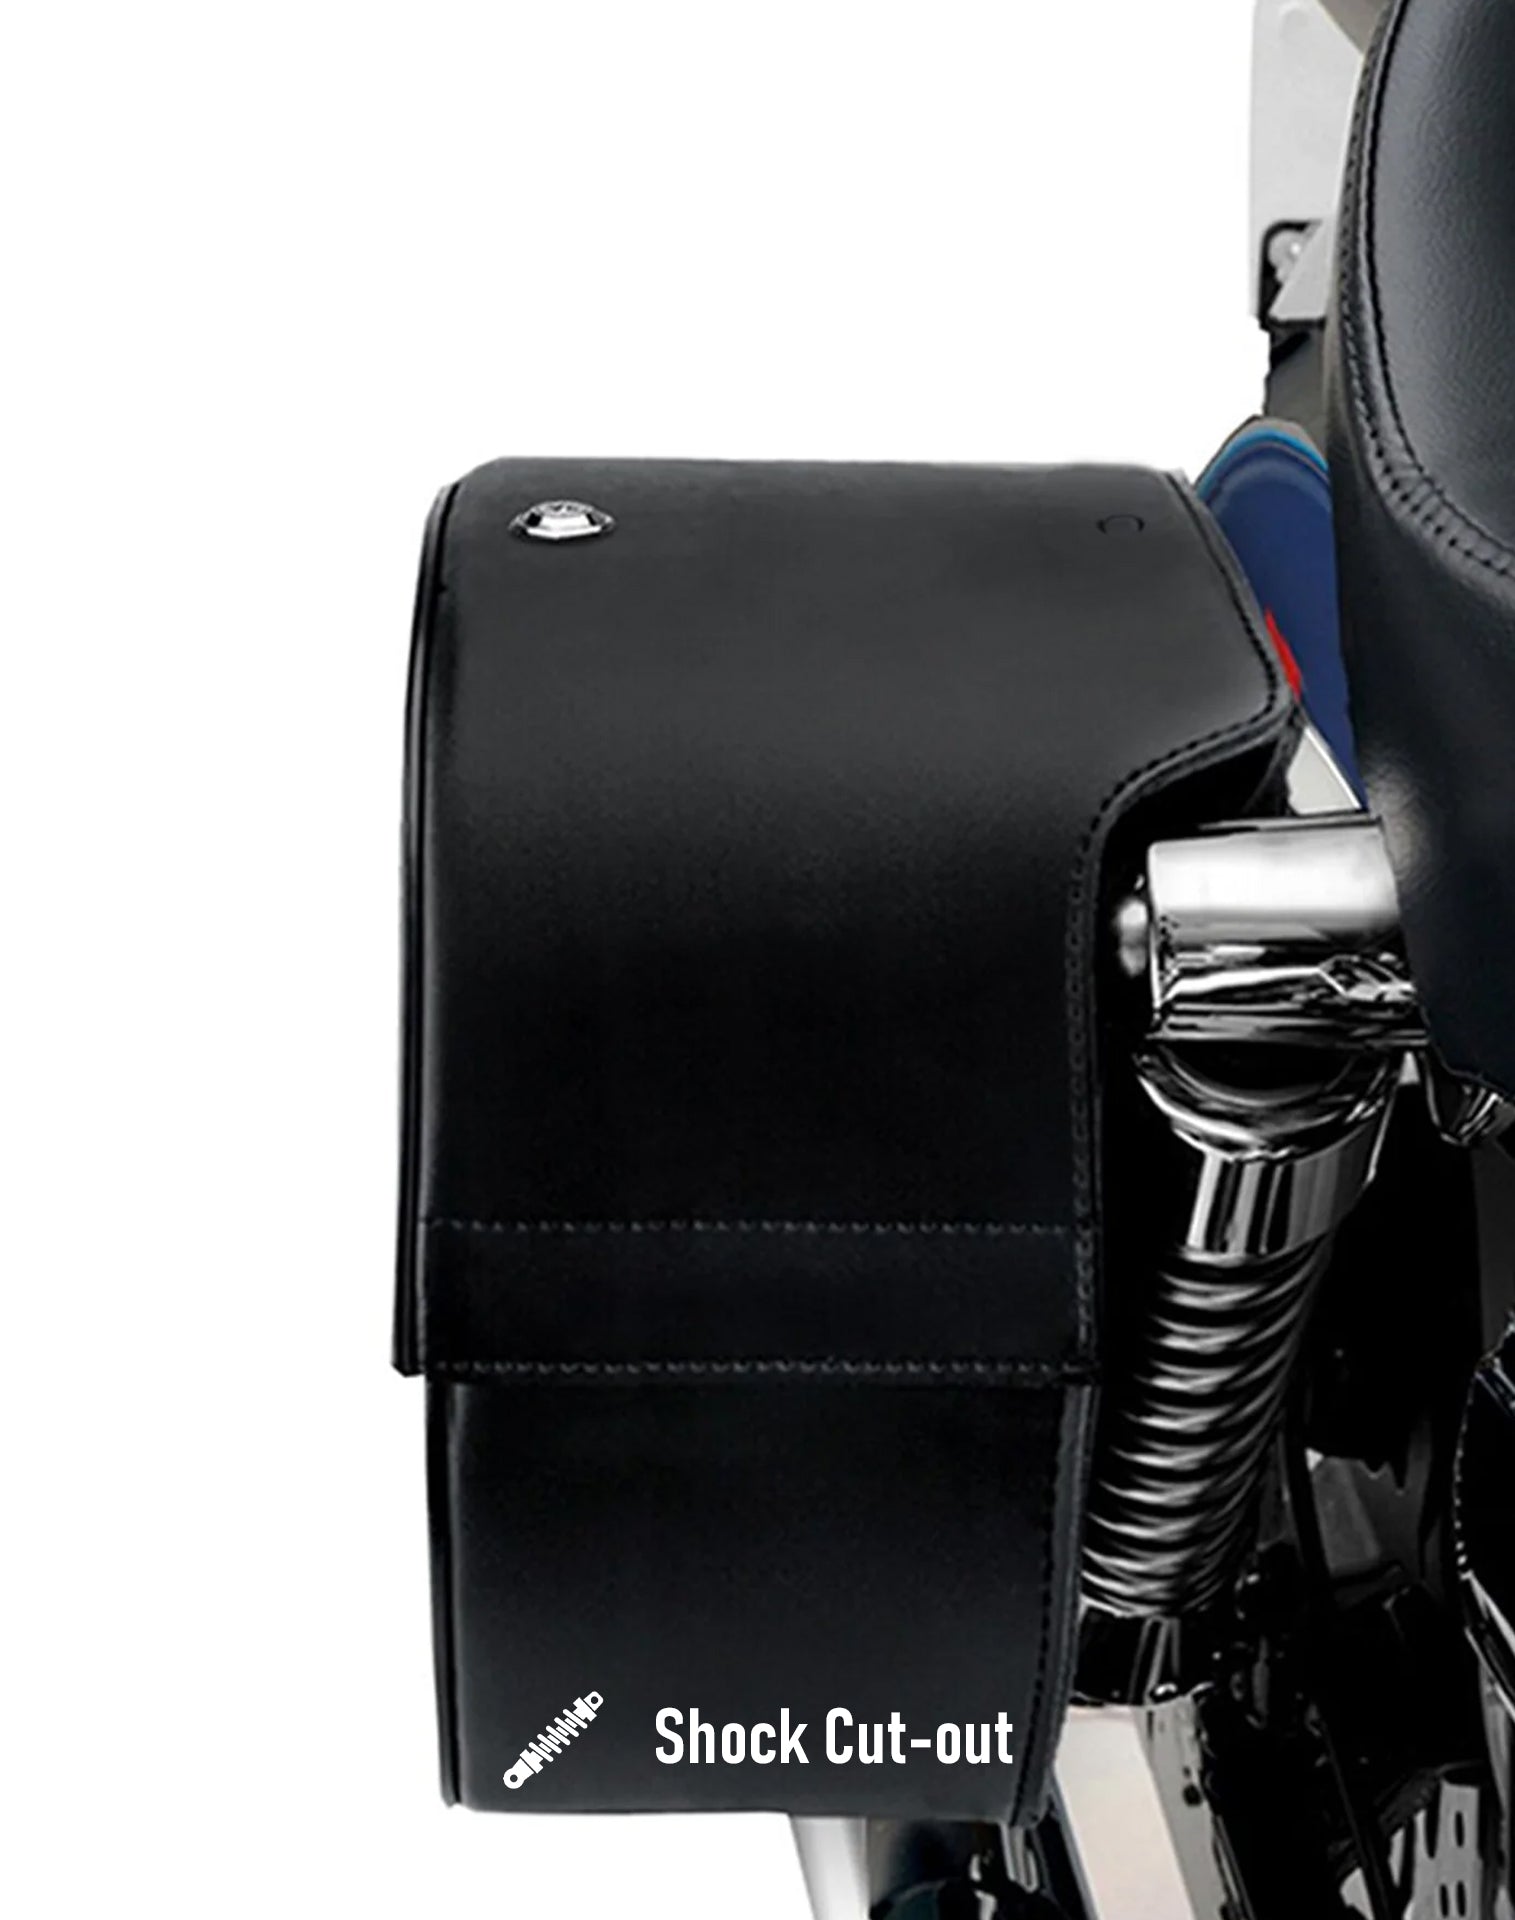 Viking Skarner Large Shock Cut Out Leather Motorcycle Saddlebags For Harley Dyna Low Rider Fxdl I Hard Shell Construction